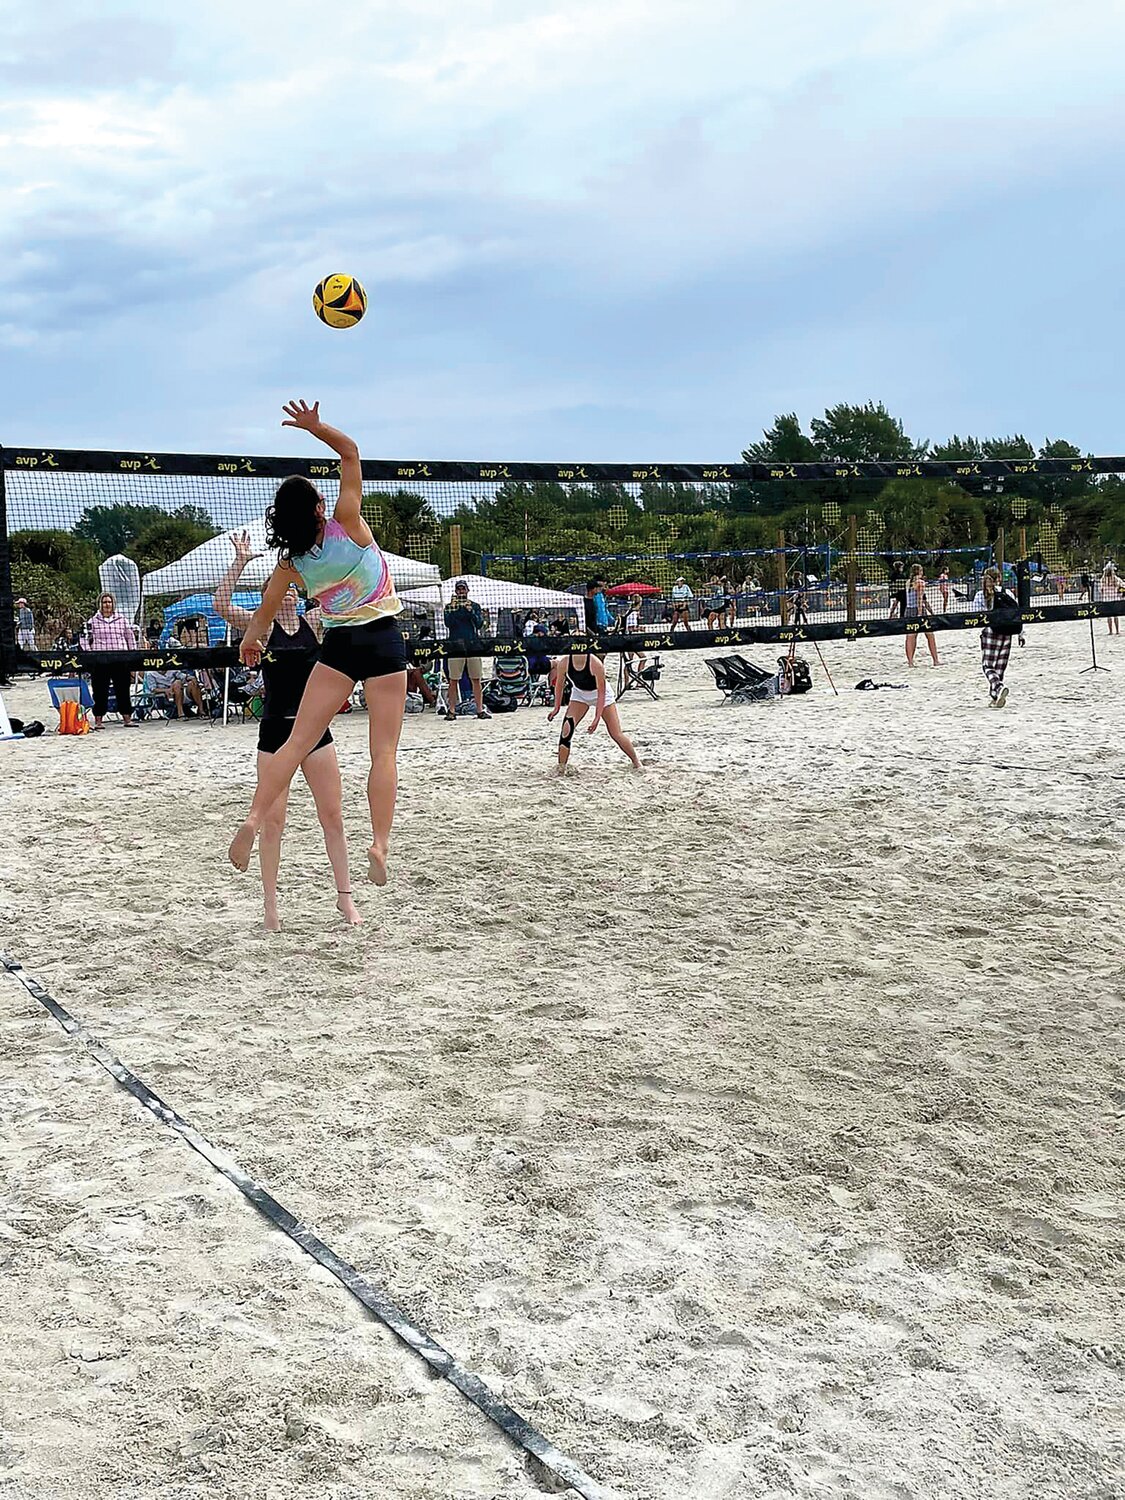 18U beach volleyball player El Means competes in the AVP East Coast Championships.